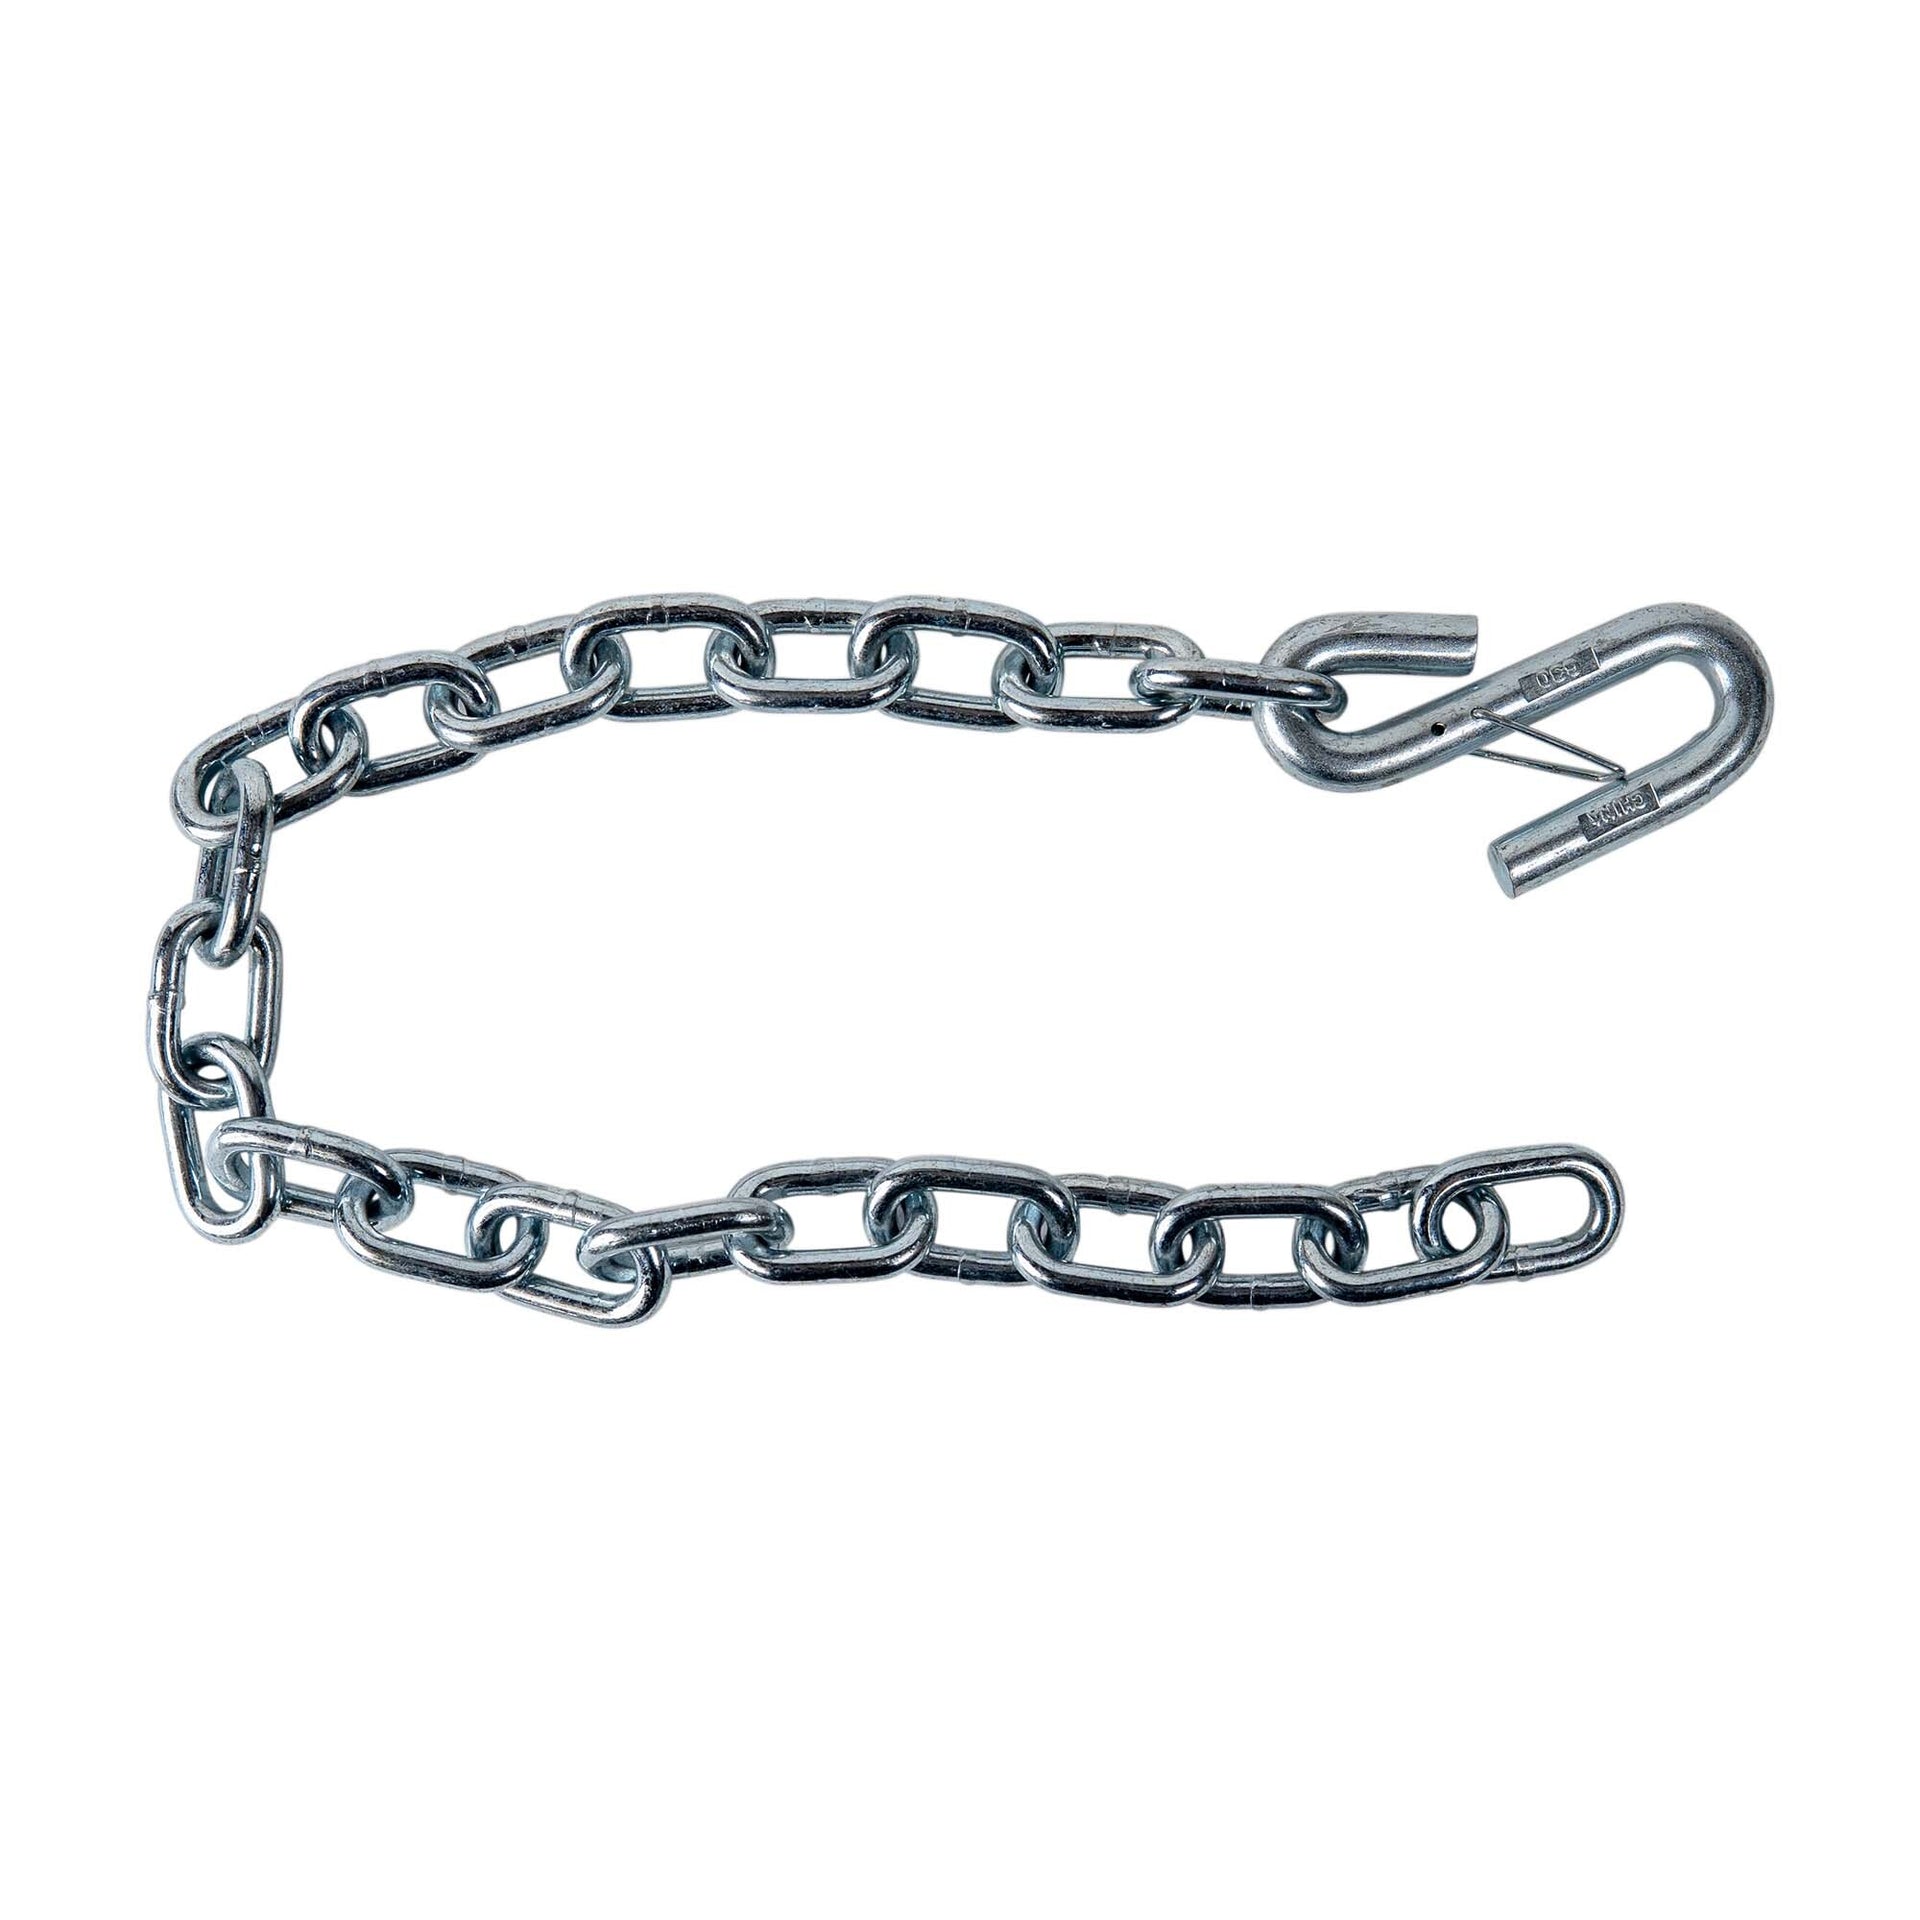 Silver Trailer Safety Chain - 5/16 x 30 - Forged (7.6k Capacity)